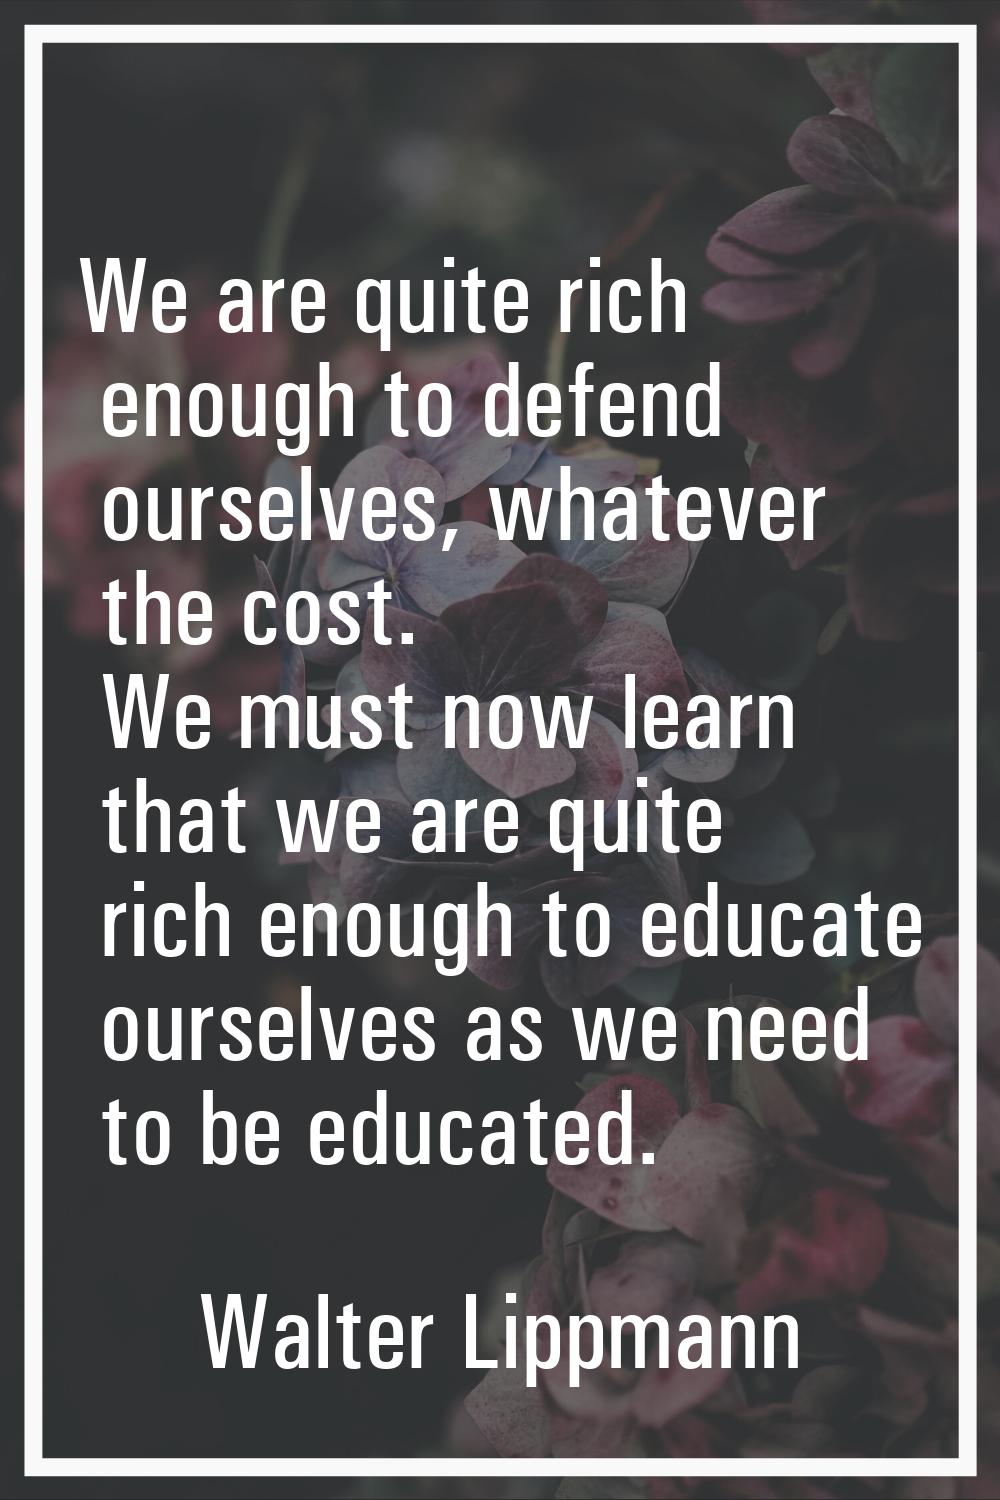 We are quite rich enough to defend ourselves, whatever the cost. We must now learn that we are quit